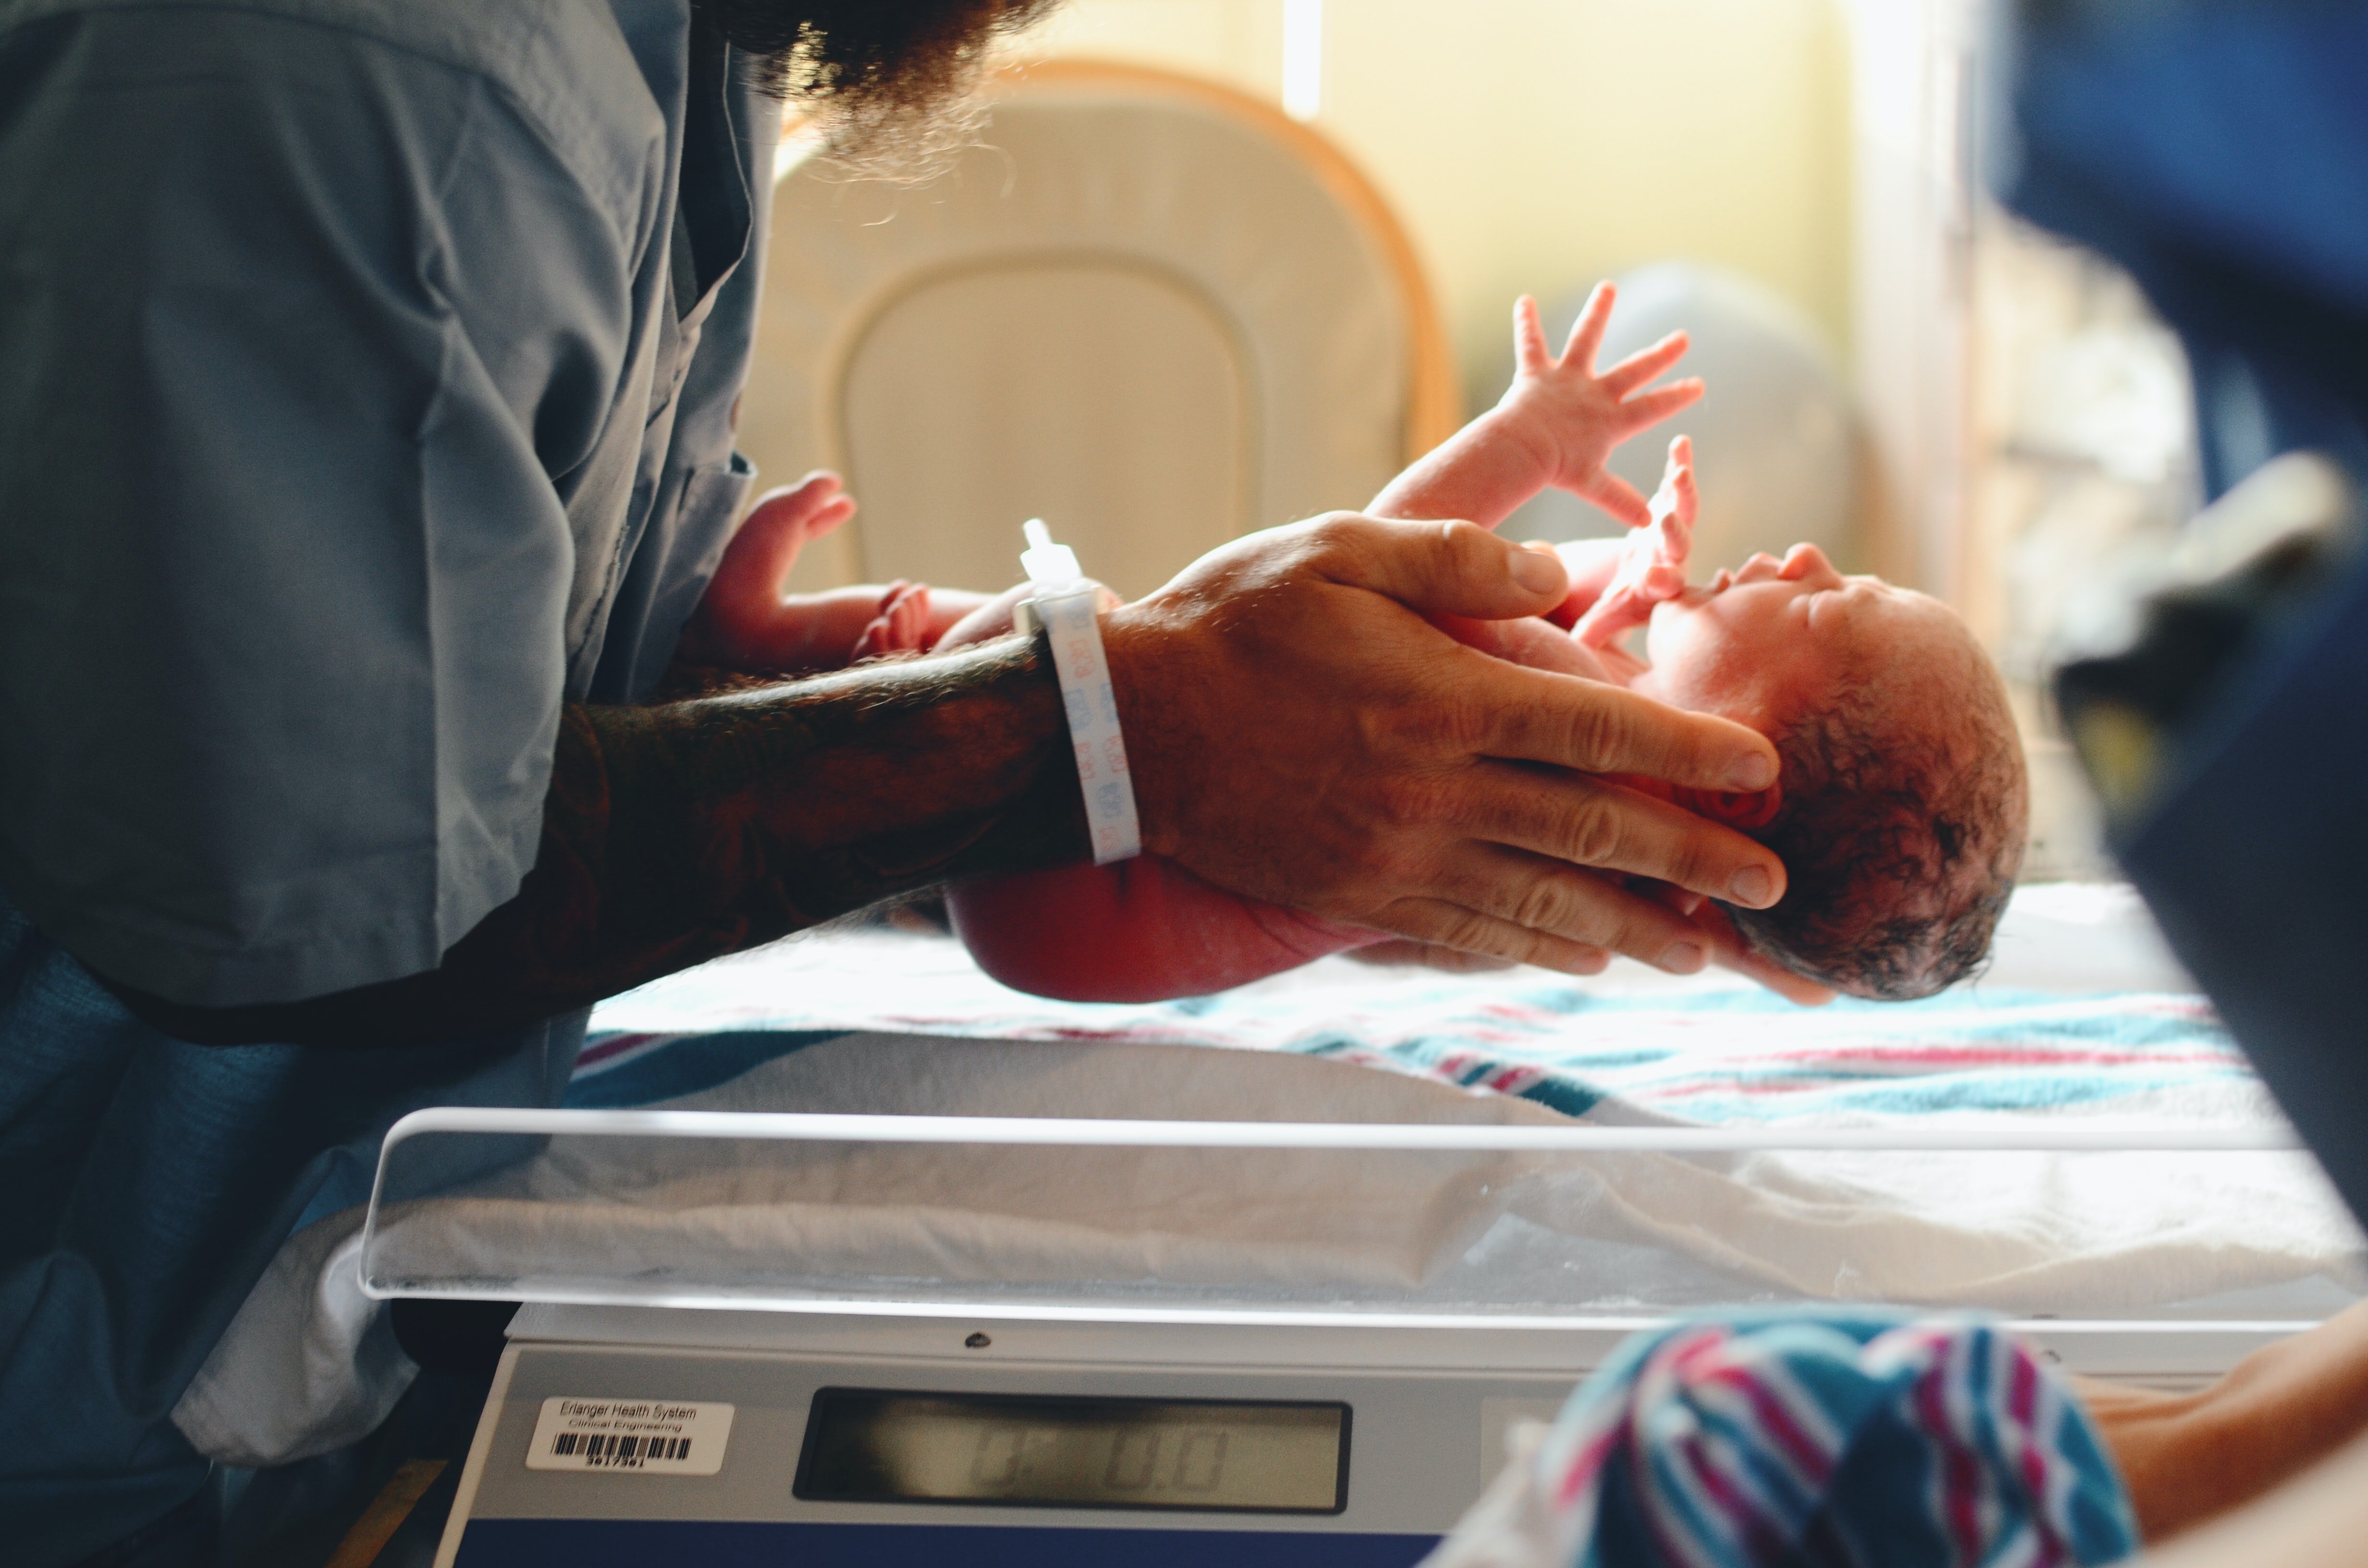 Dr. Conrad came to talk about the baby who was left at the hospital. | Source: Unsplash